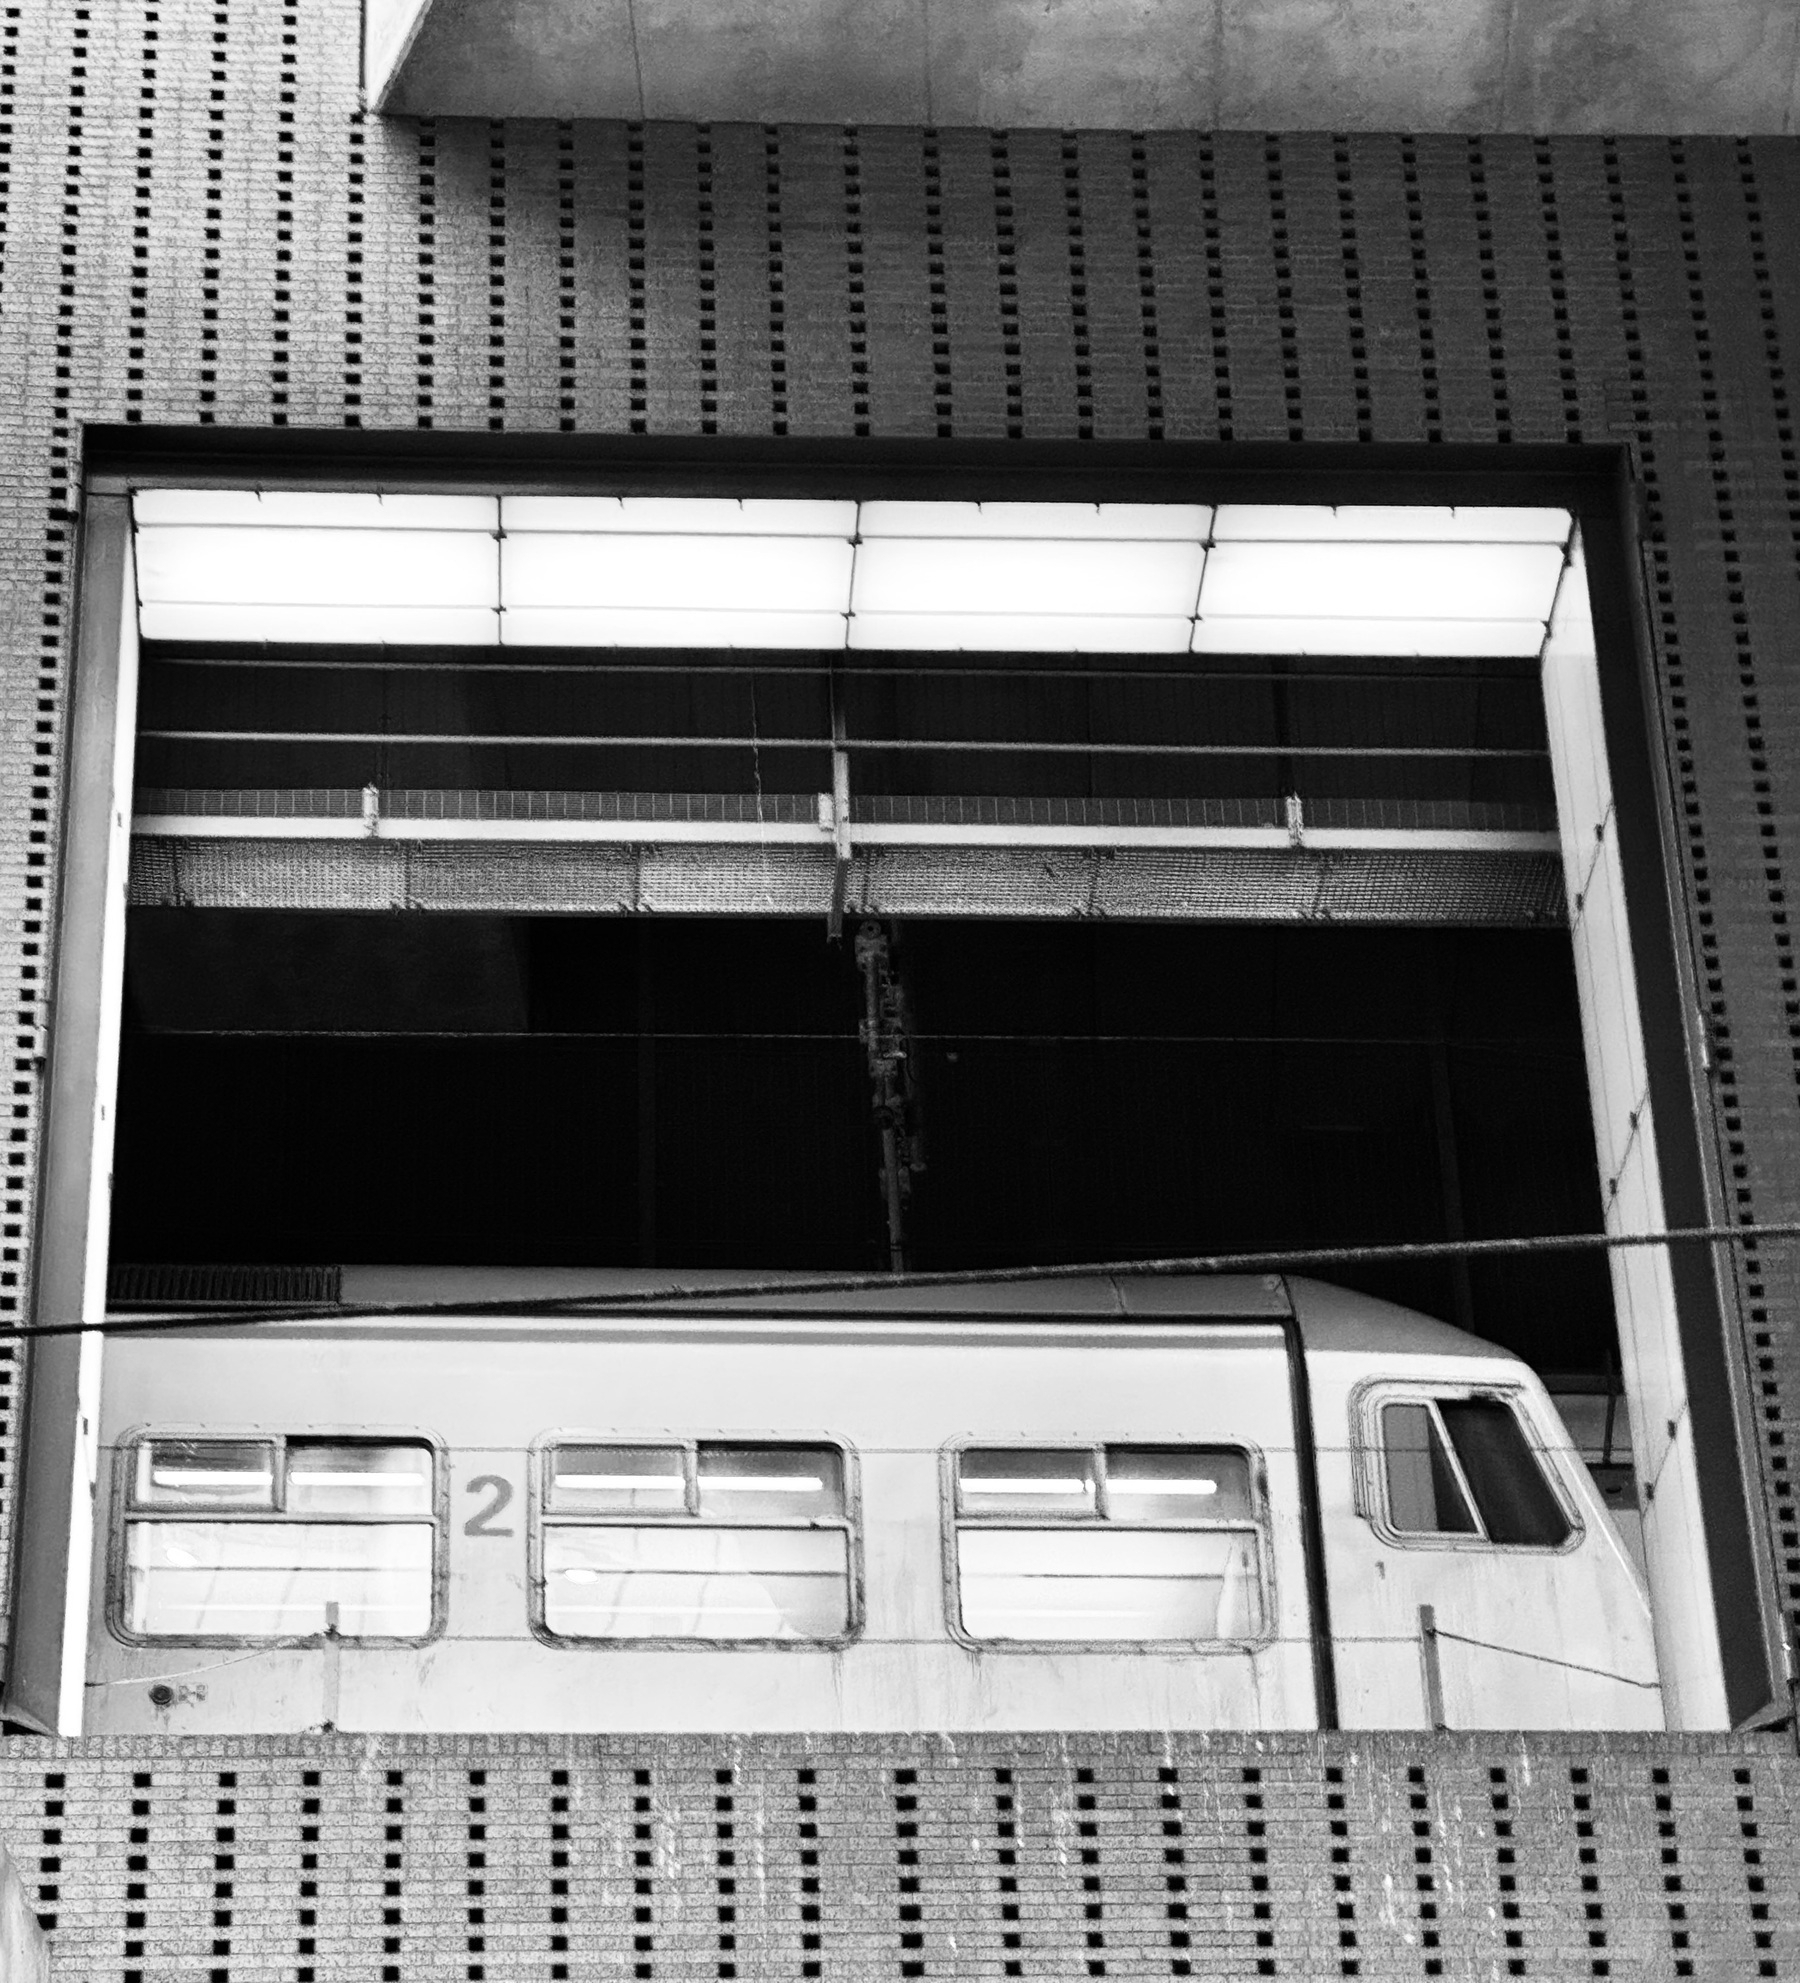 Train windows seen through a large opening in a brick wall.